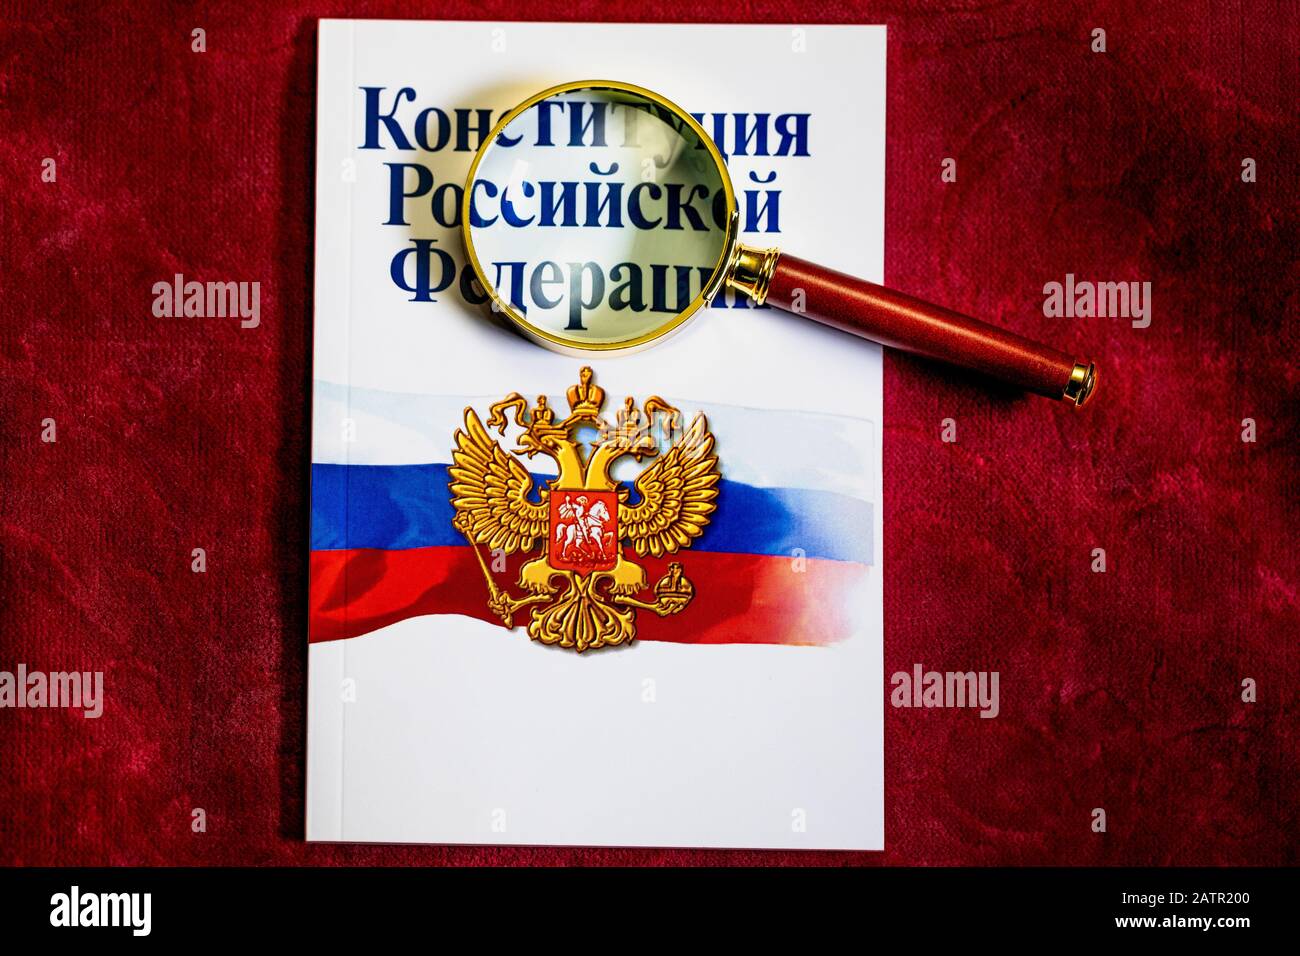 The Constitution of the Russian Federation' under a magnifying glass on red background Stock Photo